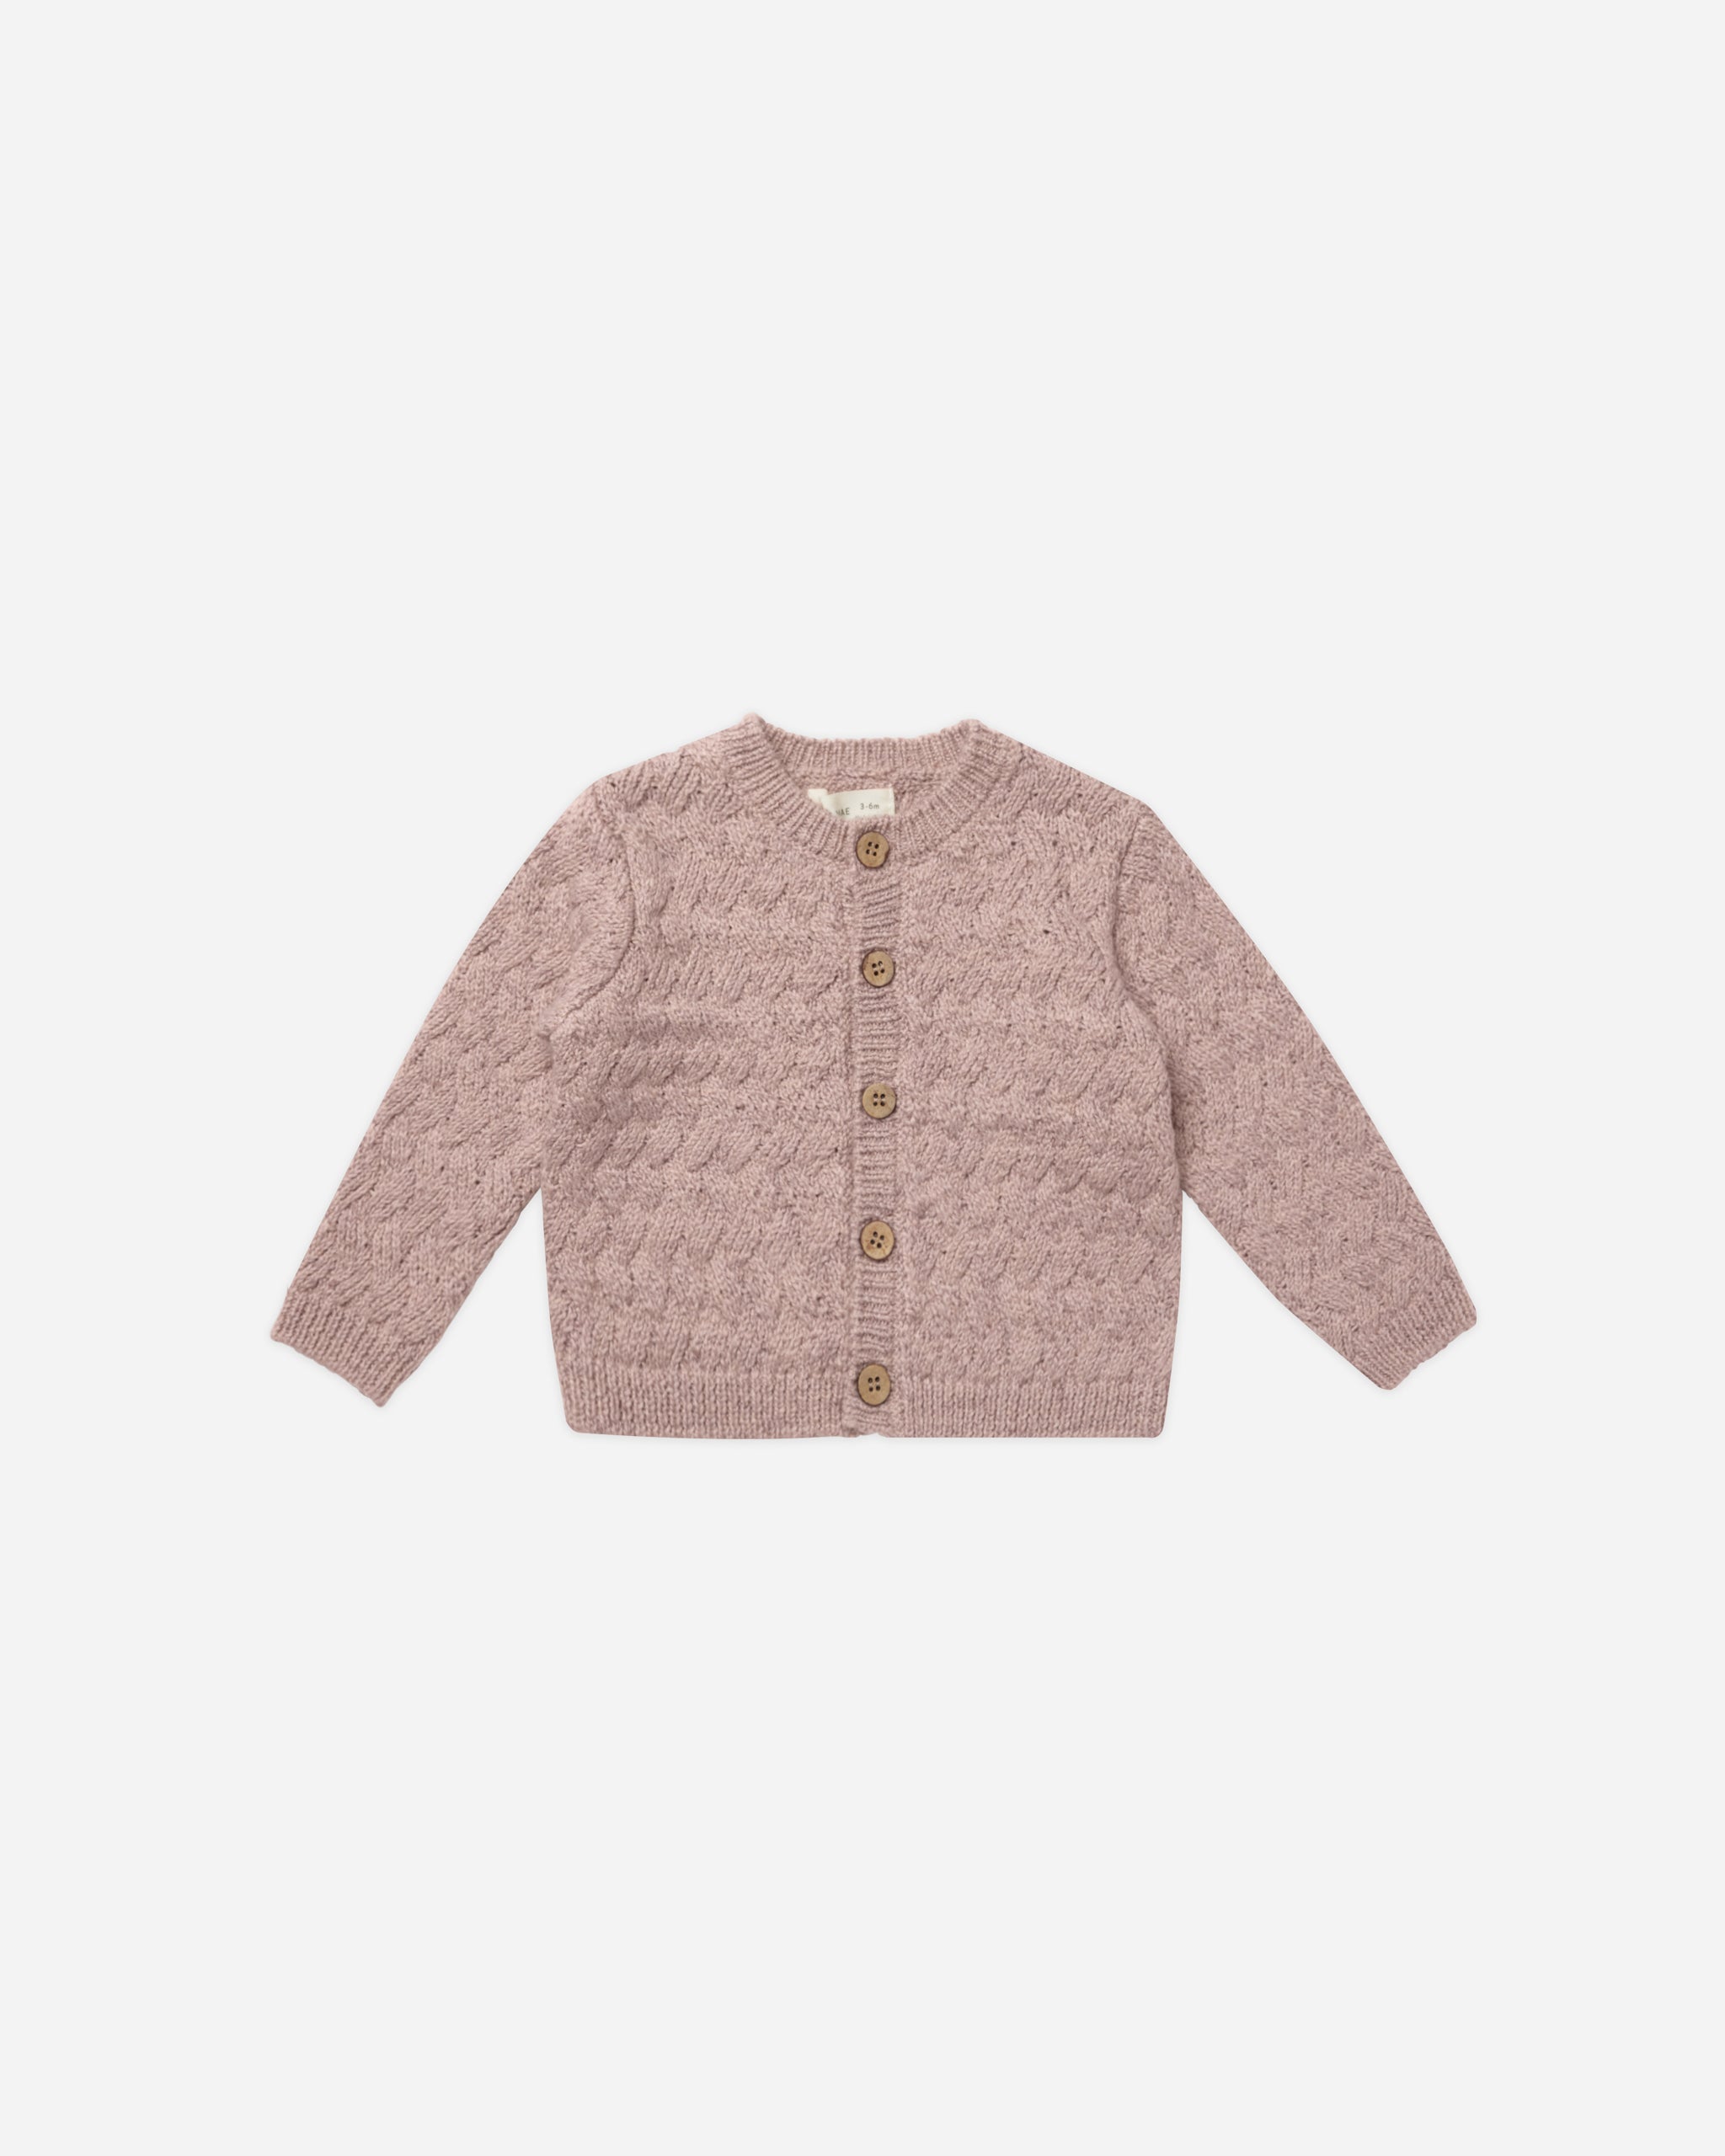 Knit Cardigan || Mauve - Rylee + Cru | Kids Clothes | Trendy Baby Clothes | Modern Infant Outfits |